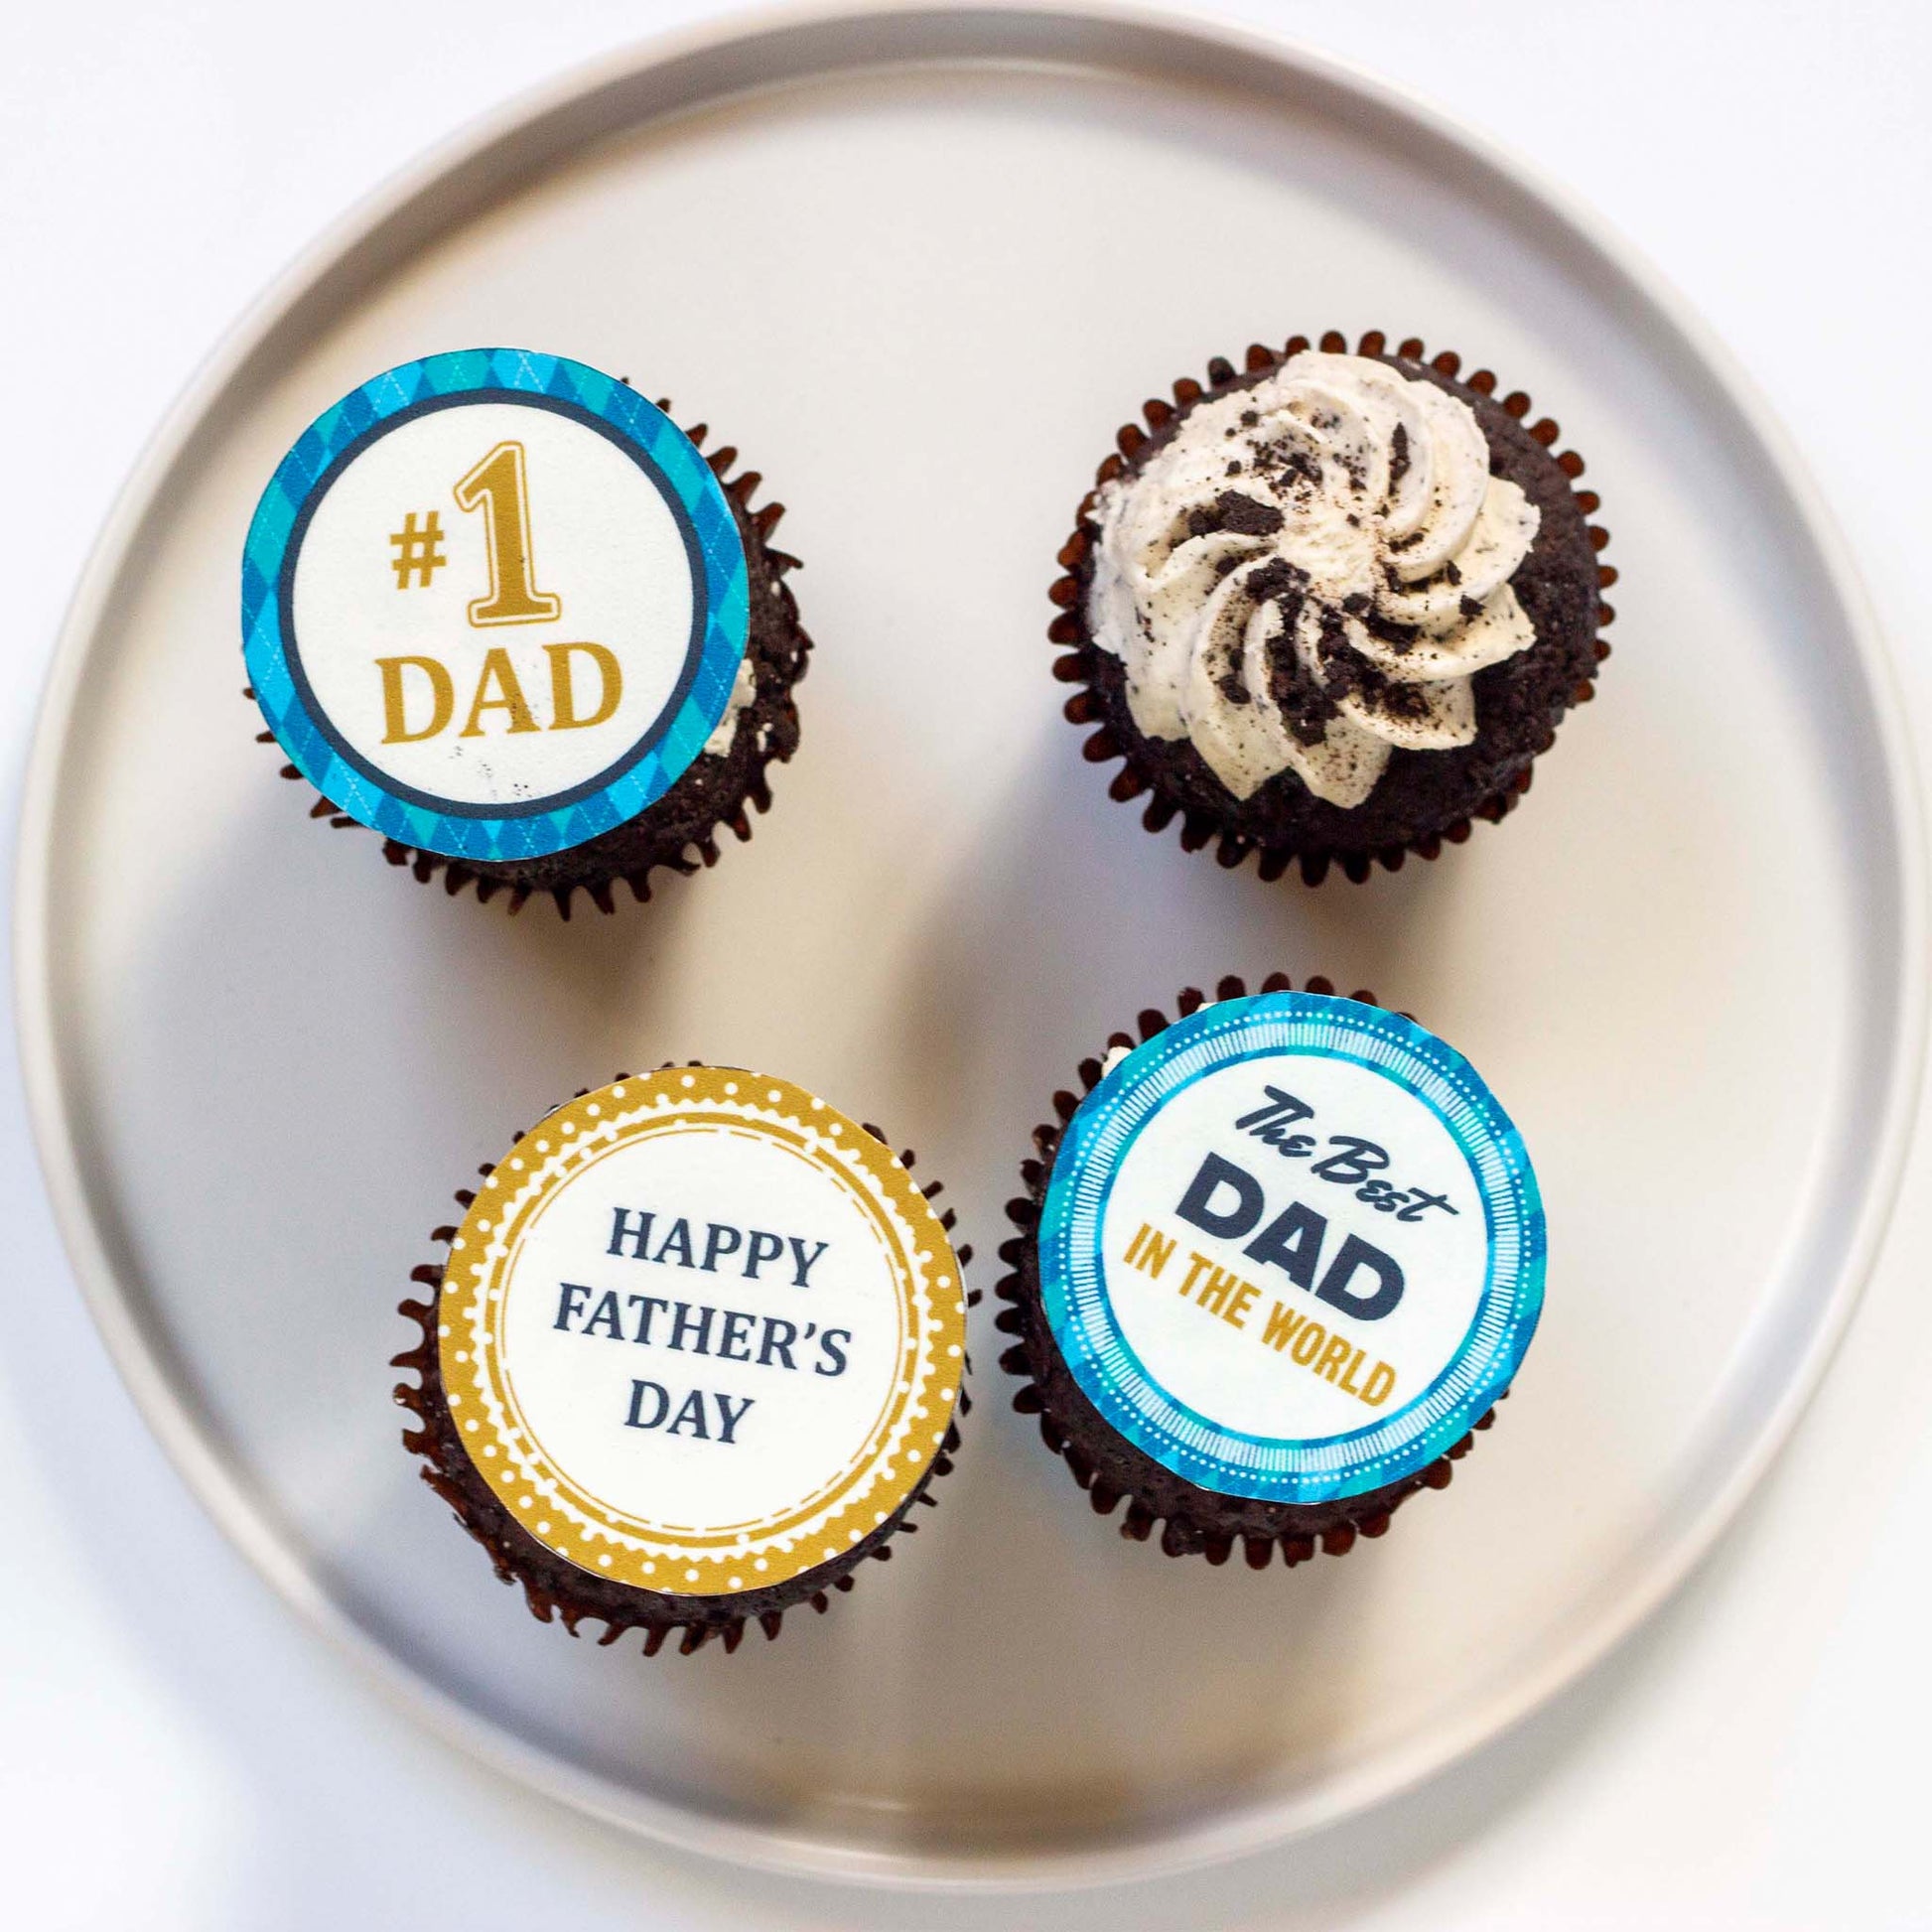 Happy Father's Day – Pre-cut Edible Icing Image